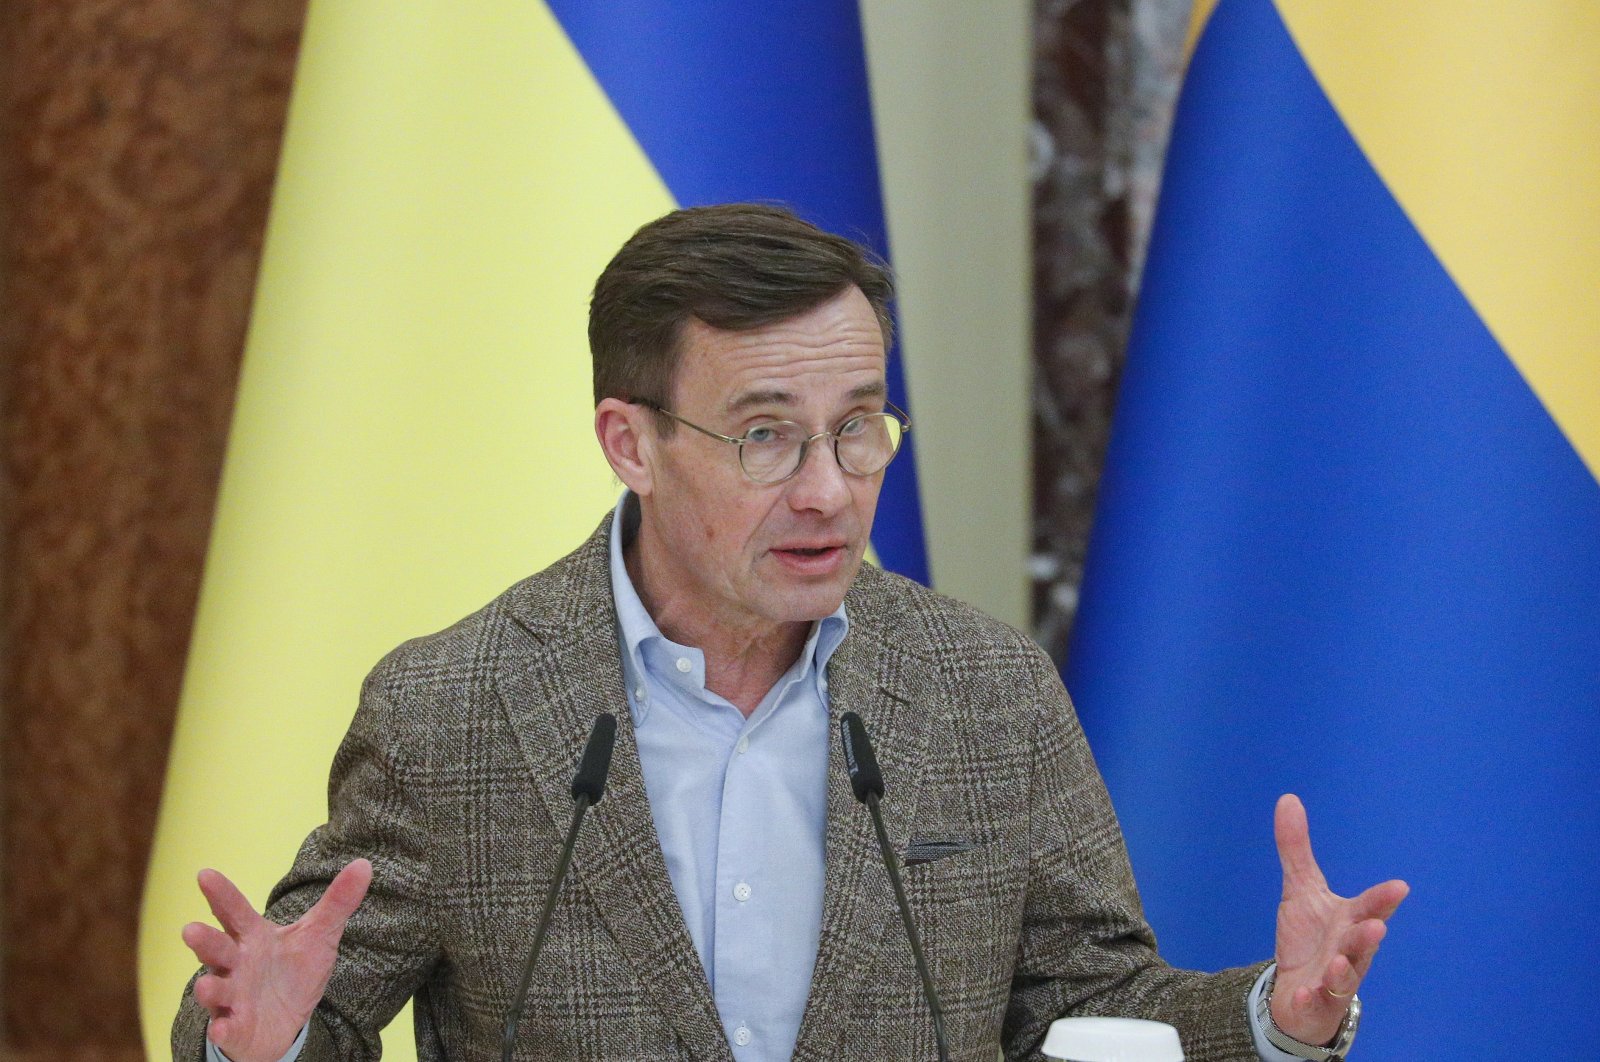 Sweden&#039;s Prime Minister Ulf Kristersson attends a joint press conference with Ukraine&#039;s President Volodymyr Zelenskyy following their meeting, in Kyiv, Ukraine, Feb. 15, 2023. (EPA File Photo)